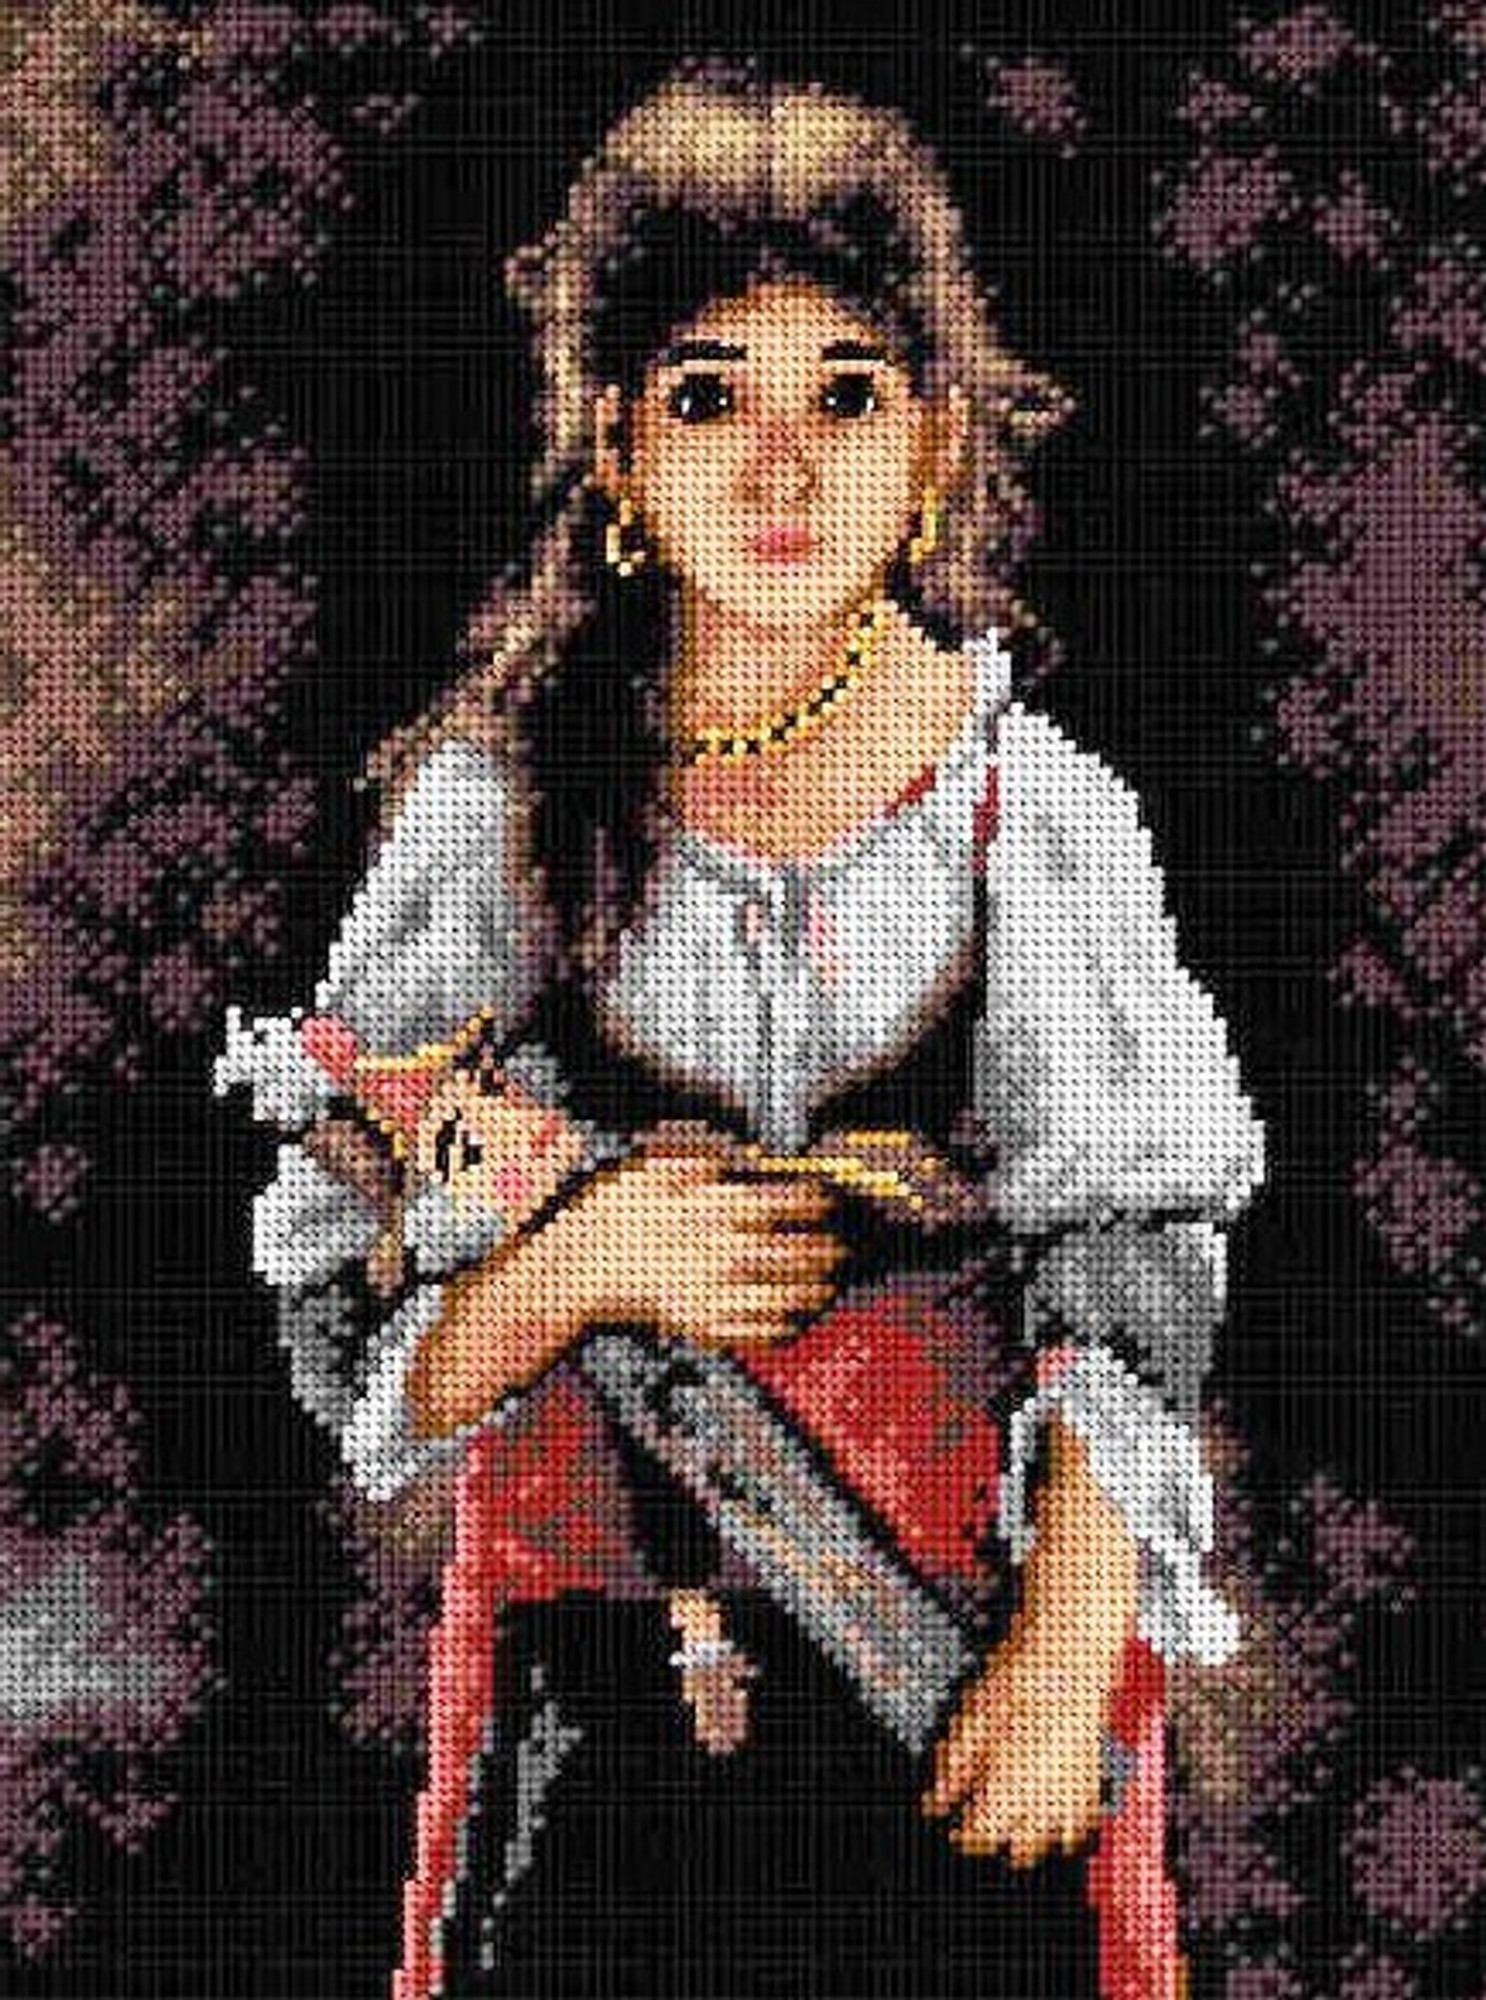 Gypsy Princess Printed Canvas for Cross Stitch Tapestry Gobelin Embroidery  Orchidea 2236J - Veralis